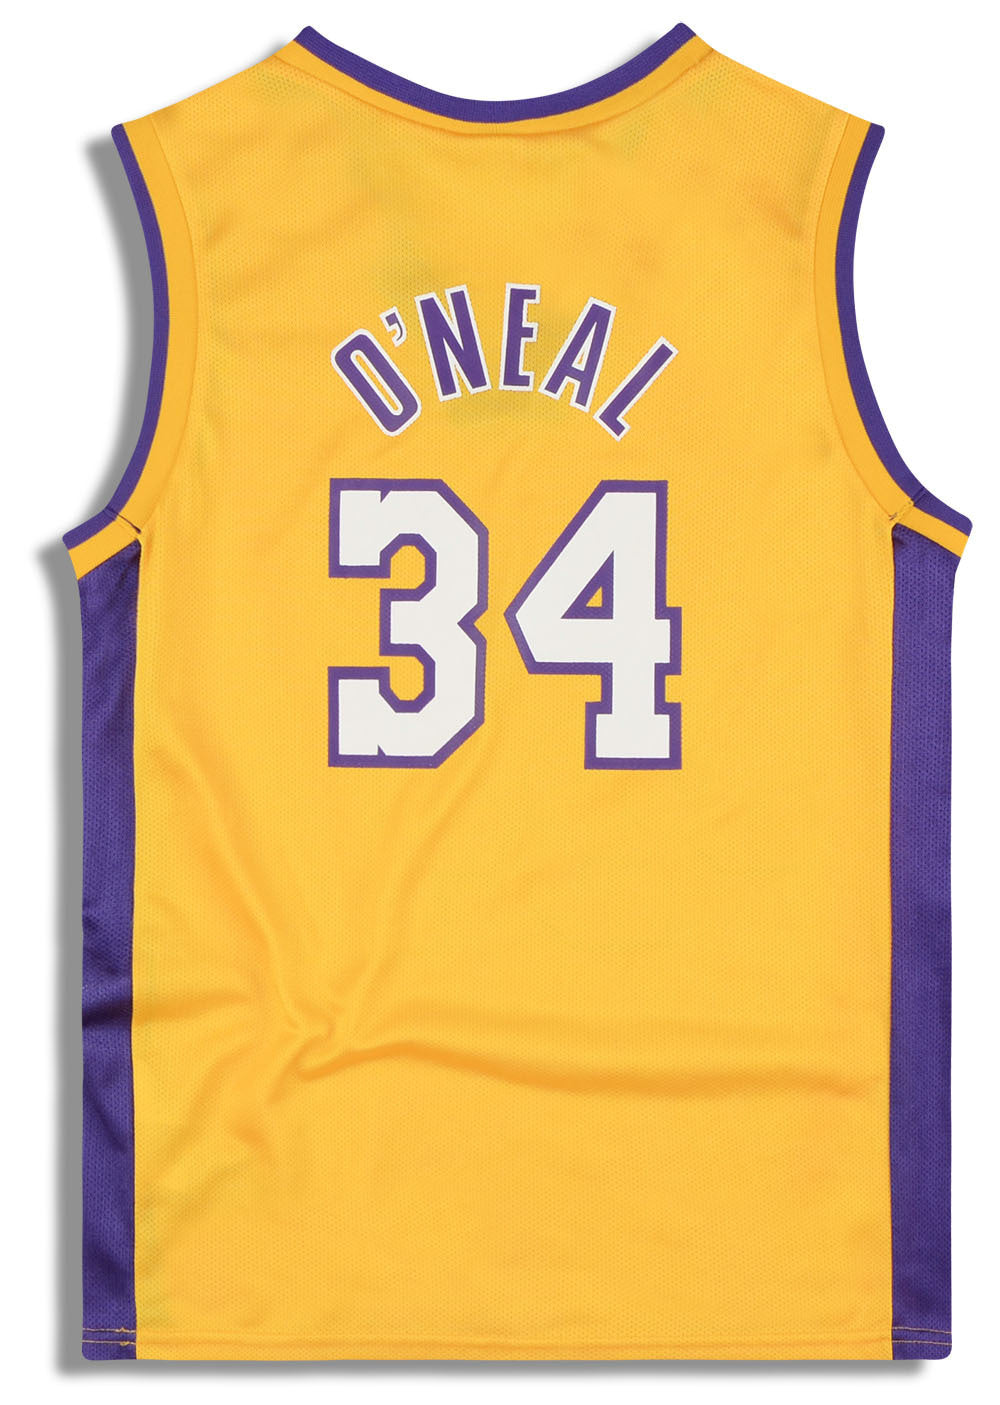 1999-02 LA LAKERS O'NEAL #34 CHAMPION JERSEY (HOME) Y - Classic American  Sports